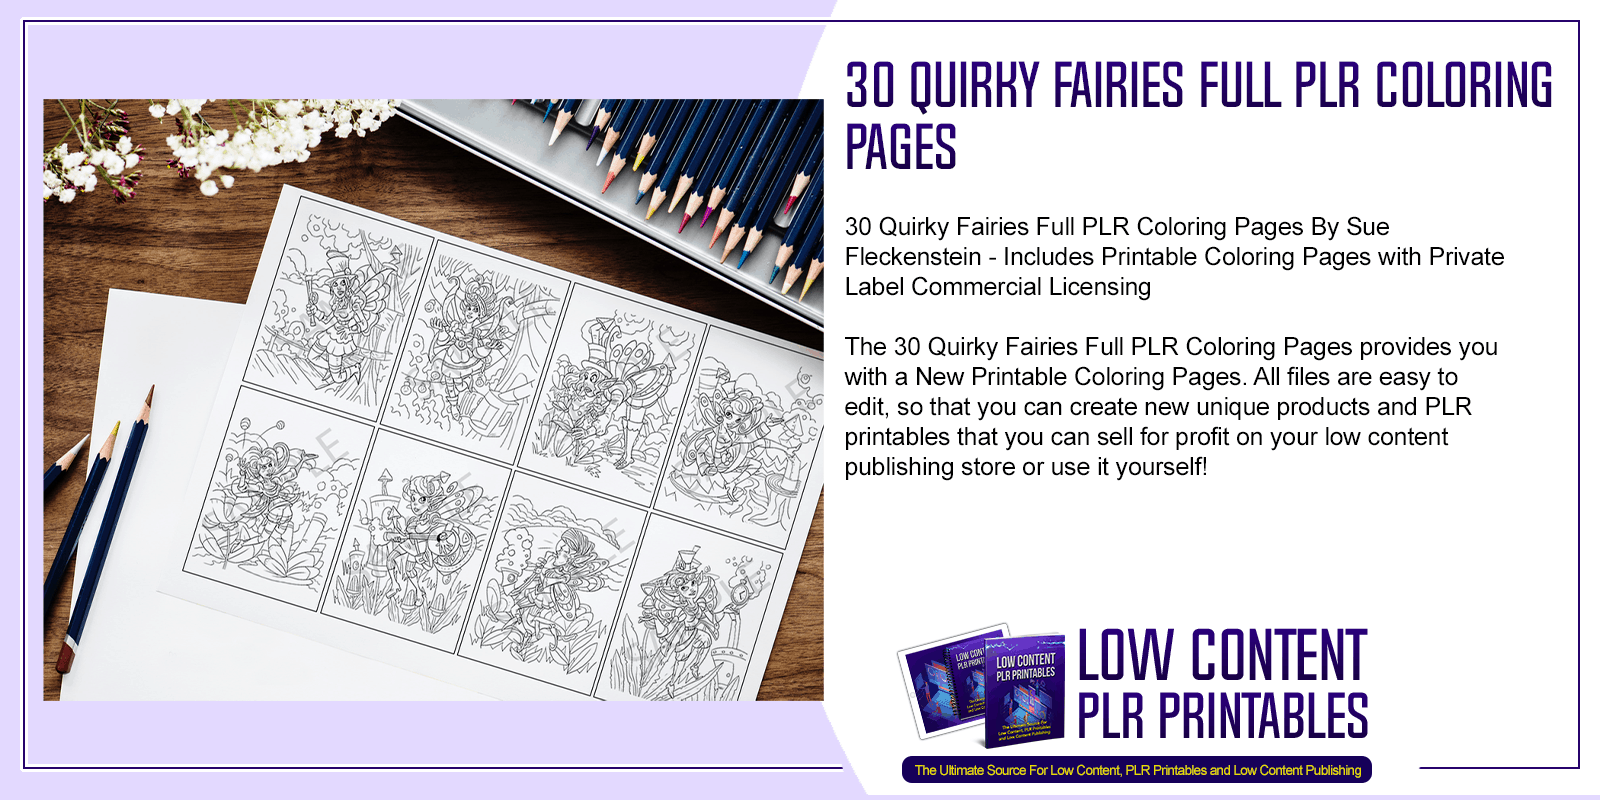 30 Quirky Fairies Full PLR Coloring Pages